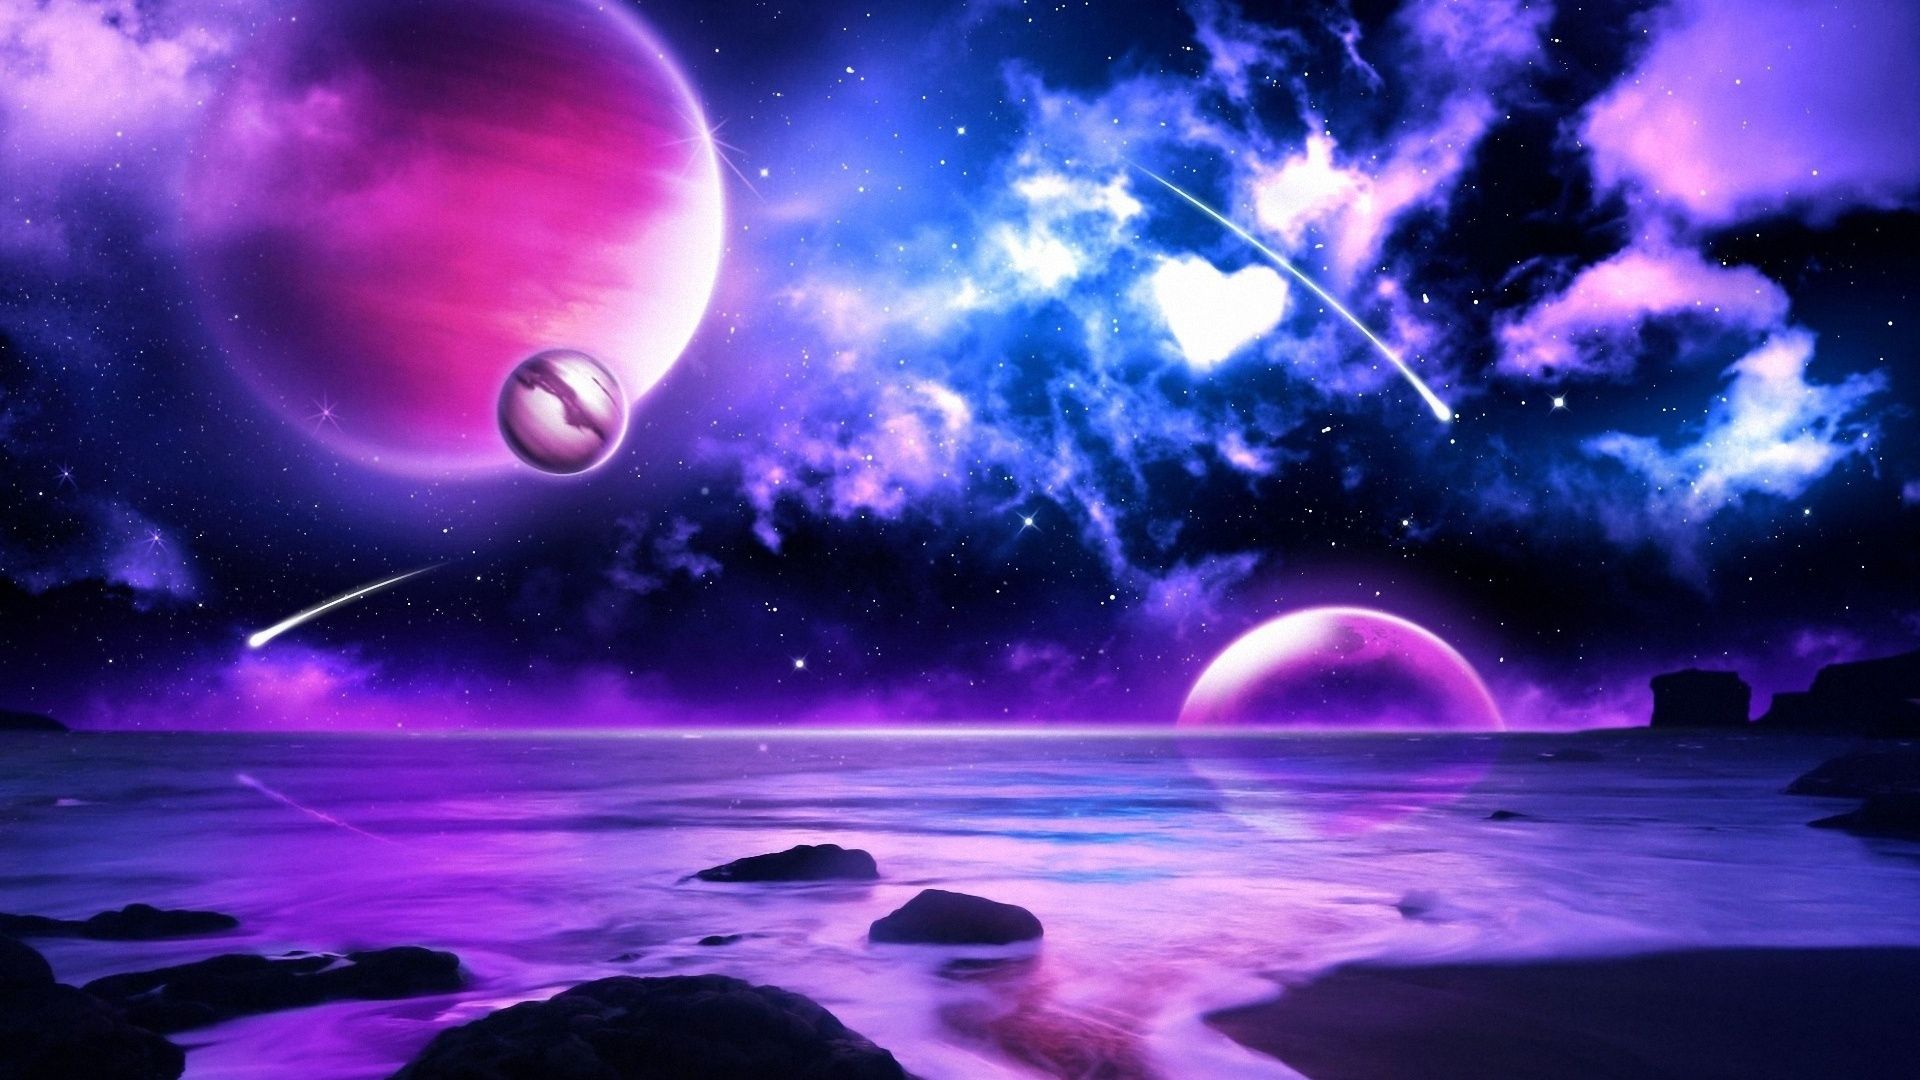 Free download Purple Space Wallpaper Universe and All Planets Picture [1920x1080] for your Desktop, Mobile & Tablet. Explore Purple Space Wallpaper. Purple Space Wallpaper, Purple Space Wallpaper, Space Wallpaper HD Purple